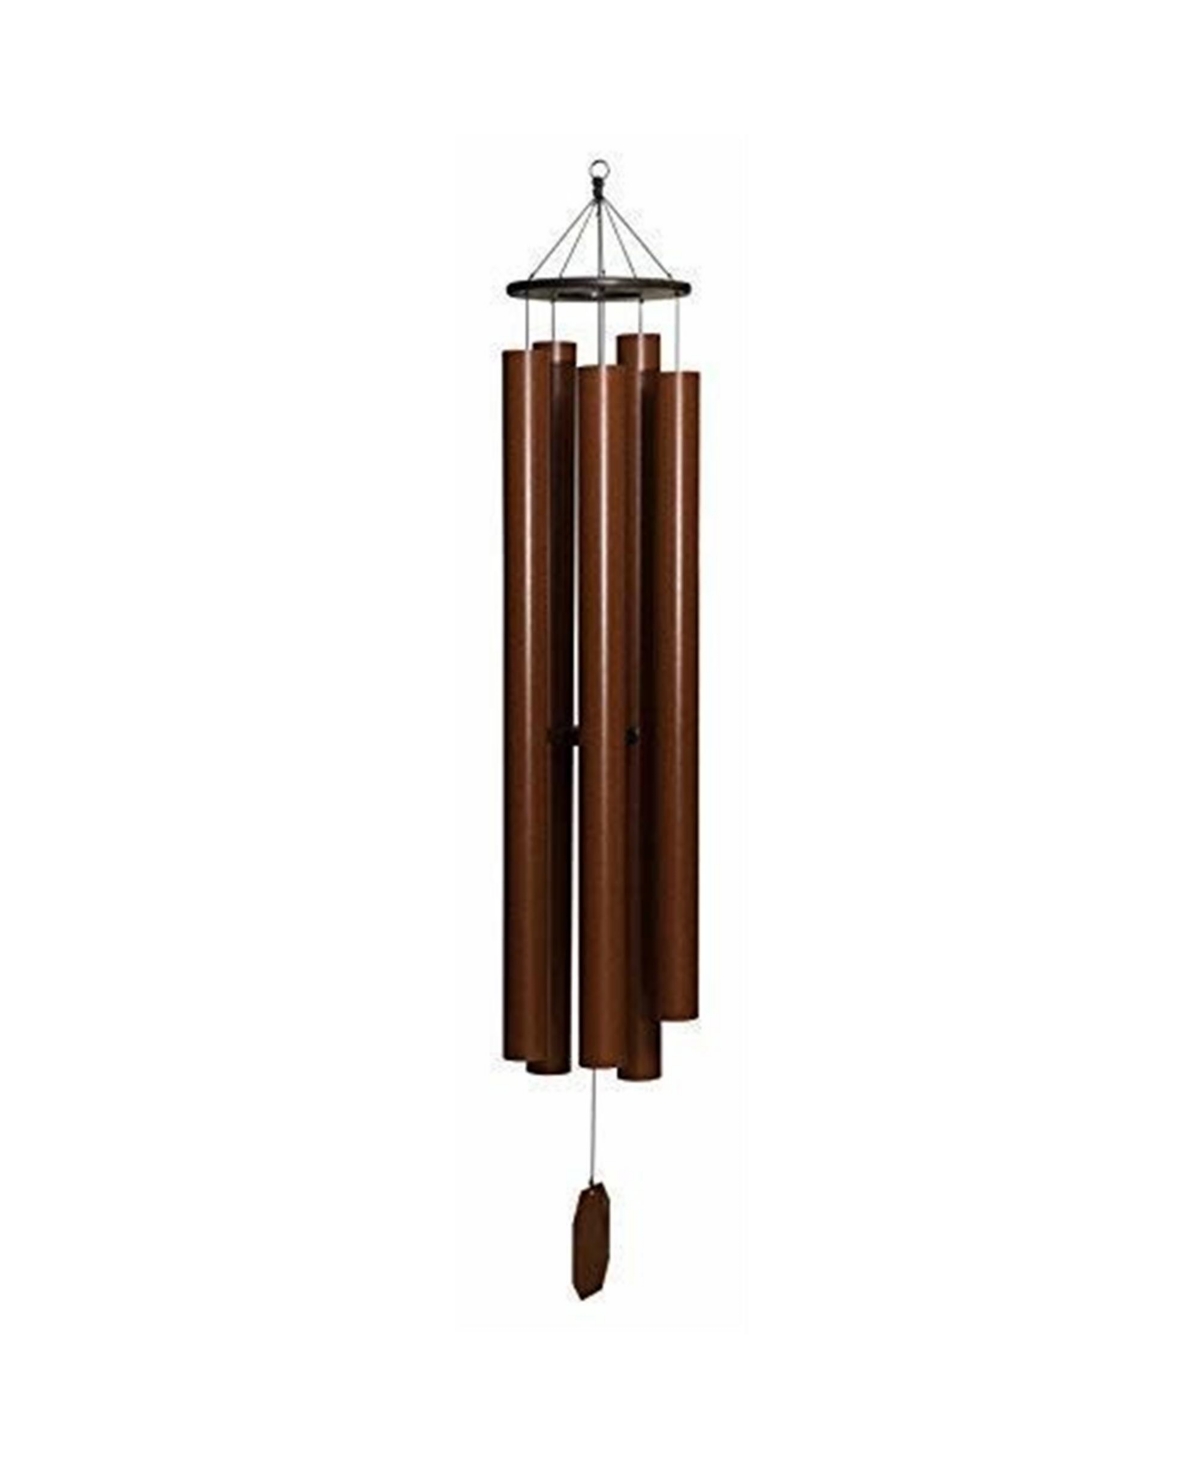 Lambright Chimes Spirit of Maroon Wind Chime Amish Crafted, 75in